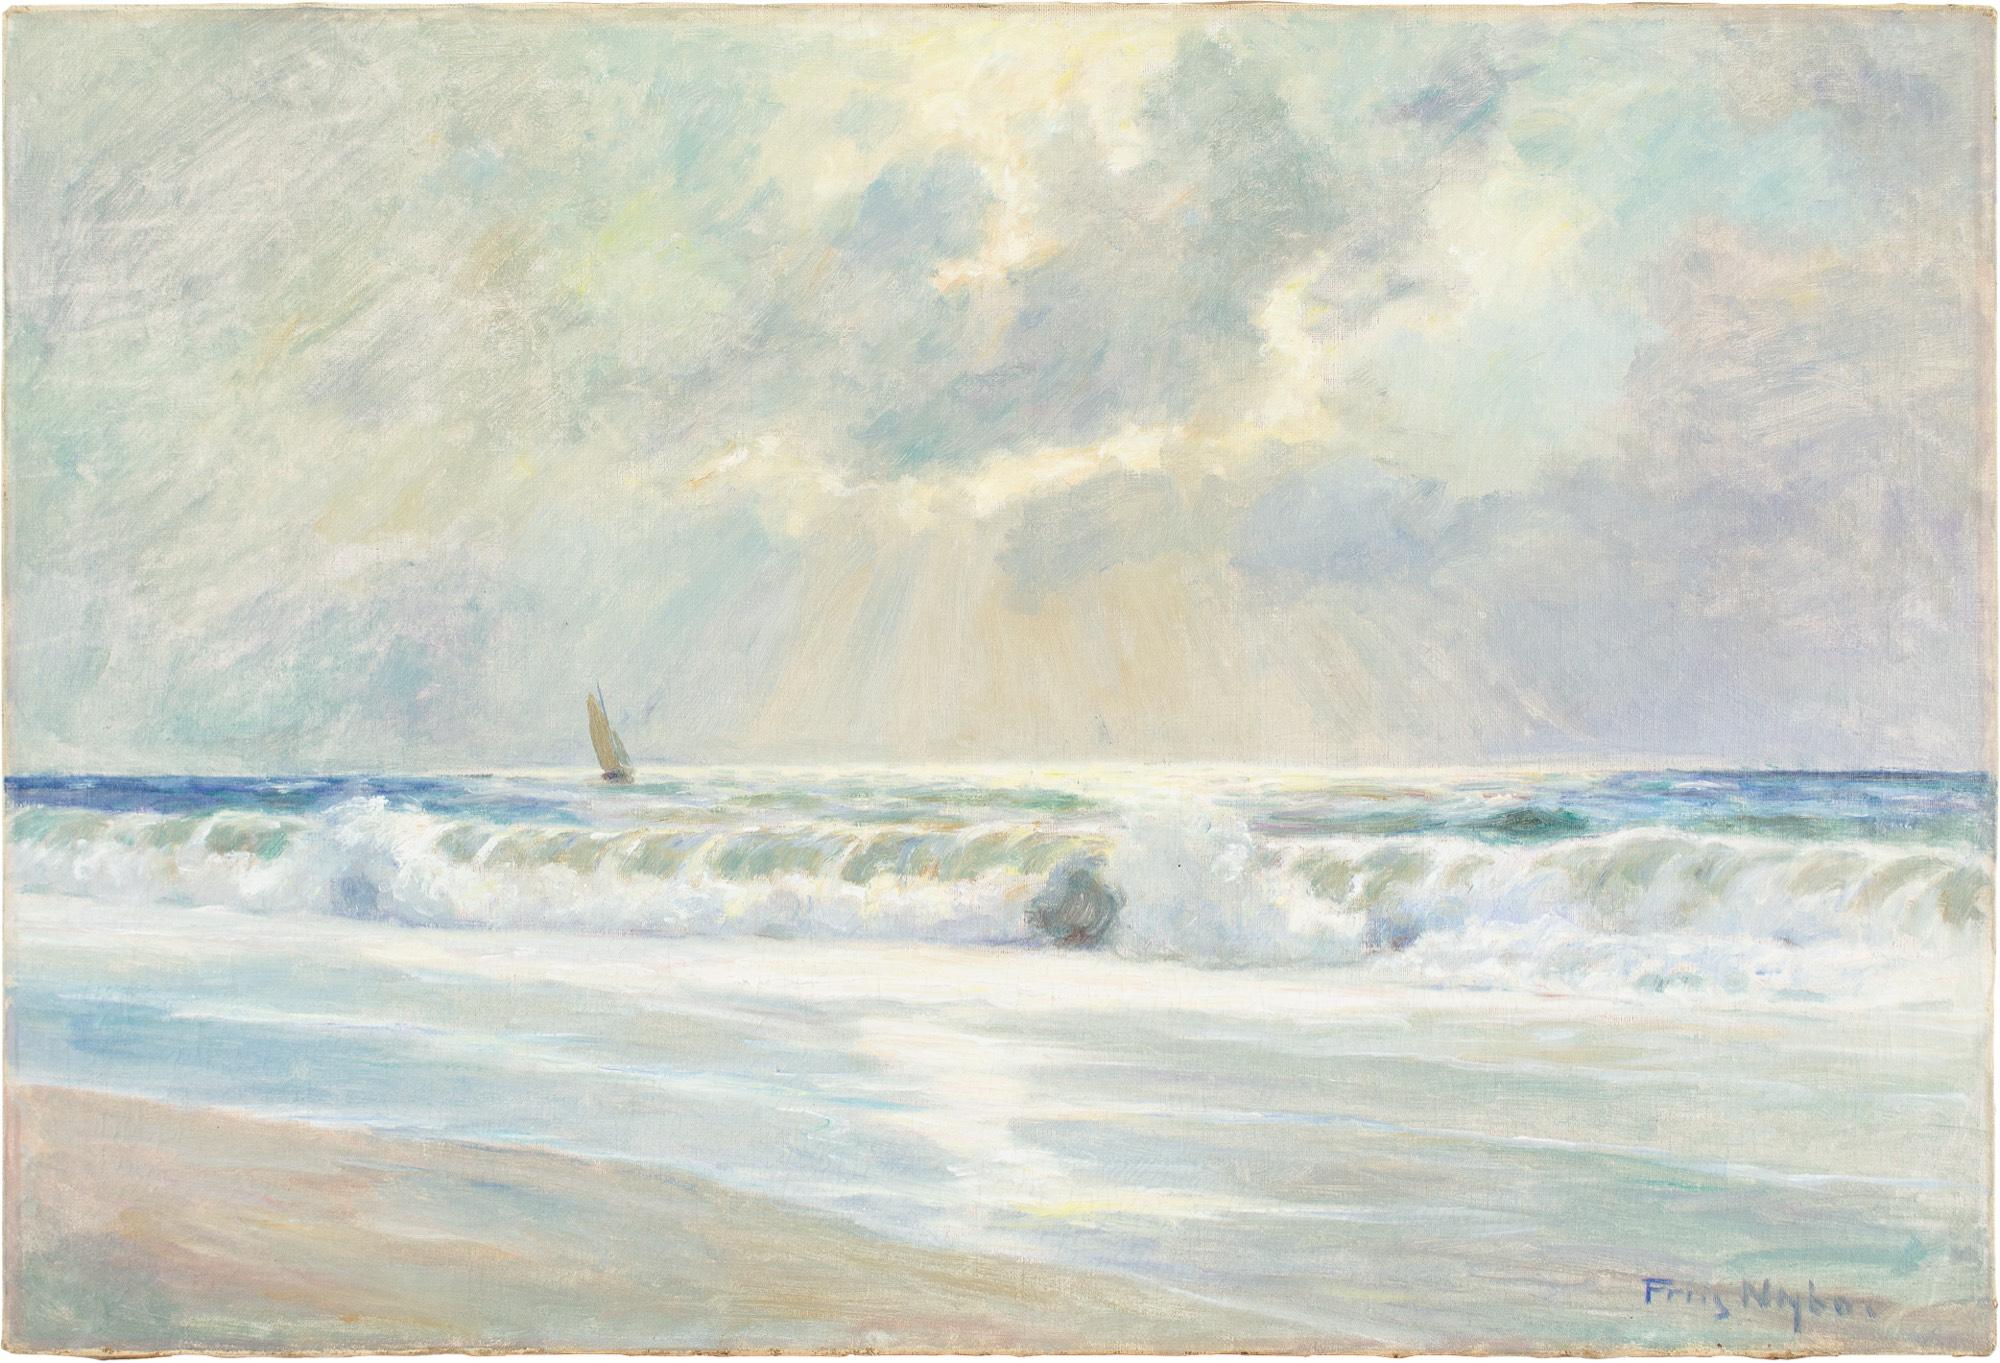 This early 20th-century oil painting by Danish artist Poul Friis Nybo (1847-1932) depicts breaking waves on the coast of North Zealand, Denmark.

Nybo painted this outside, standing by his easel on the sands at North Zealand. The sound of breakers